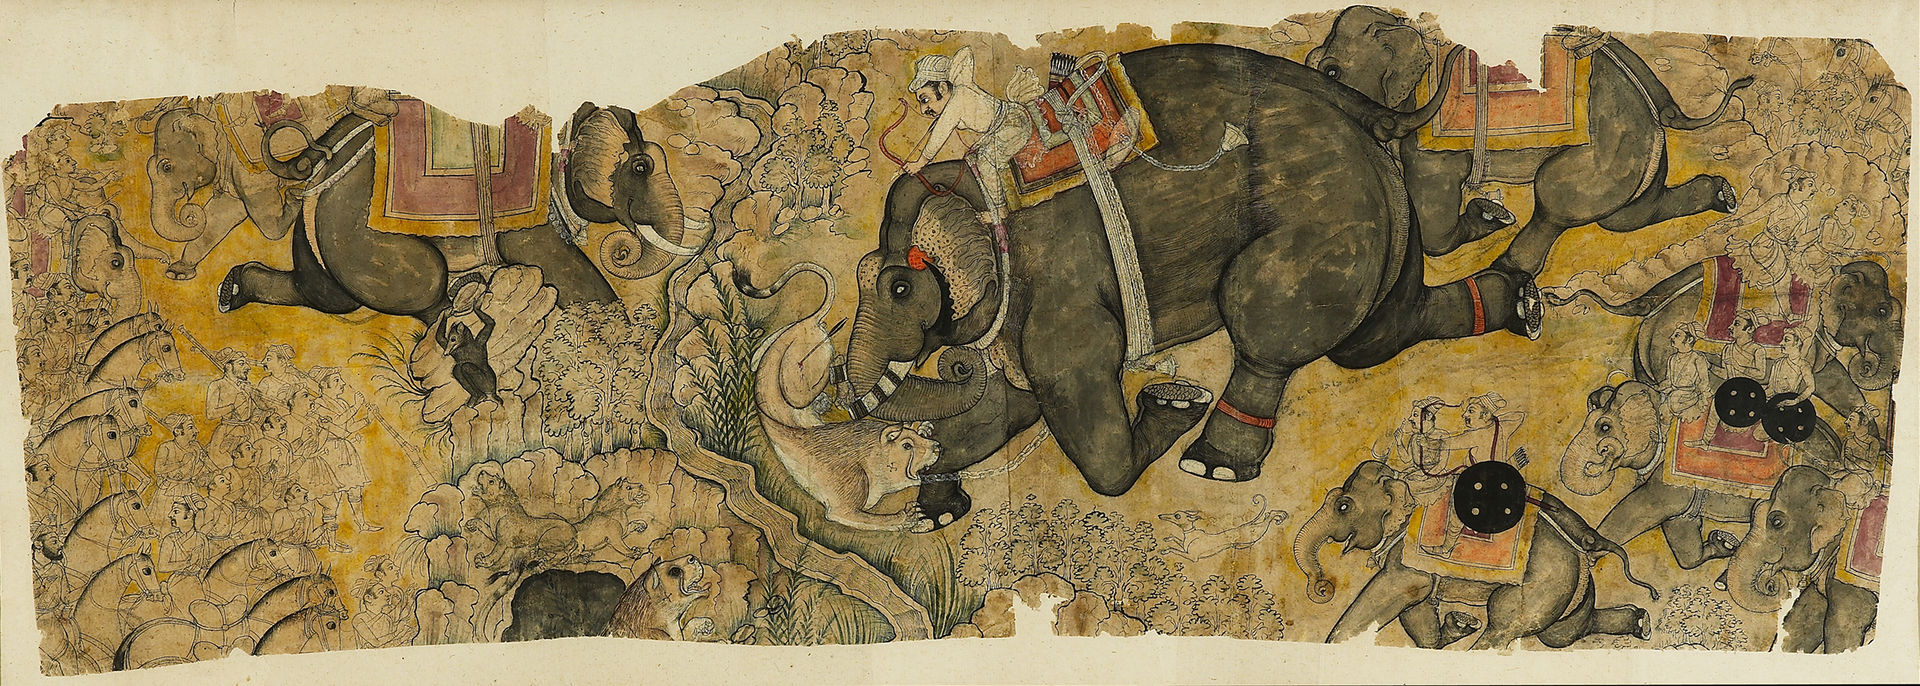 Painting of elephant and lion fight